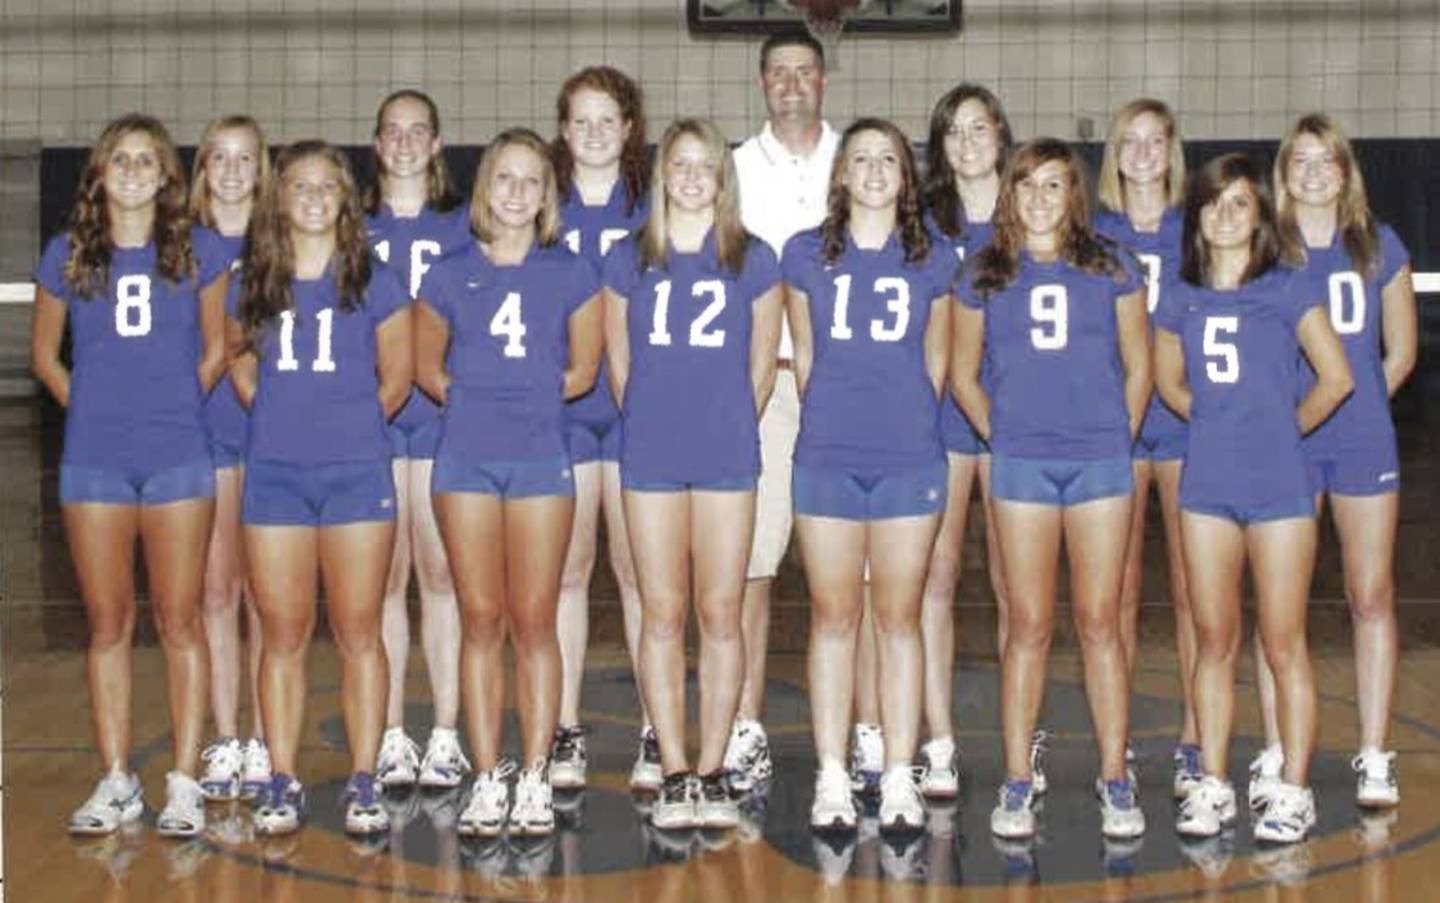 The 2008 Princeton volleyball team placed fourth in the Class 2A state tournament. Team members were (front row, from left) Tara Bonucci, Brooke Mueller, Sylvie Tracy, Sarah Schlund, Megan Gibson, Katlin Peterson and Stephanie Bonucci; and (back row) Molly Stephens, Sarah Schlund, Leah Shaw, coach Andy Puck, Jacquie Kane, Lacey Jensen and Jolynn Kane.